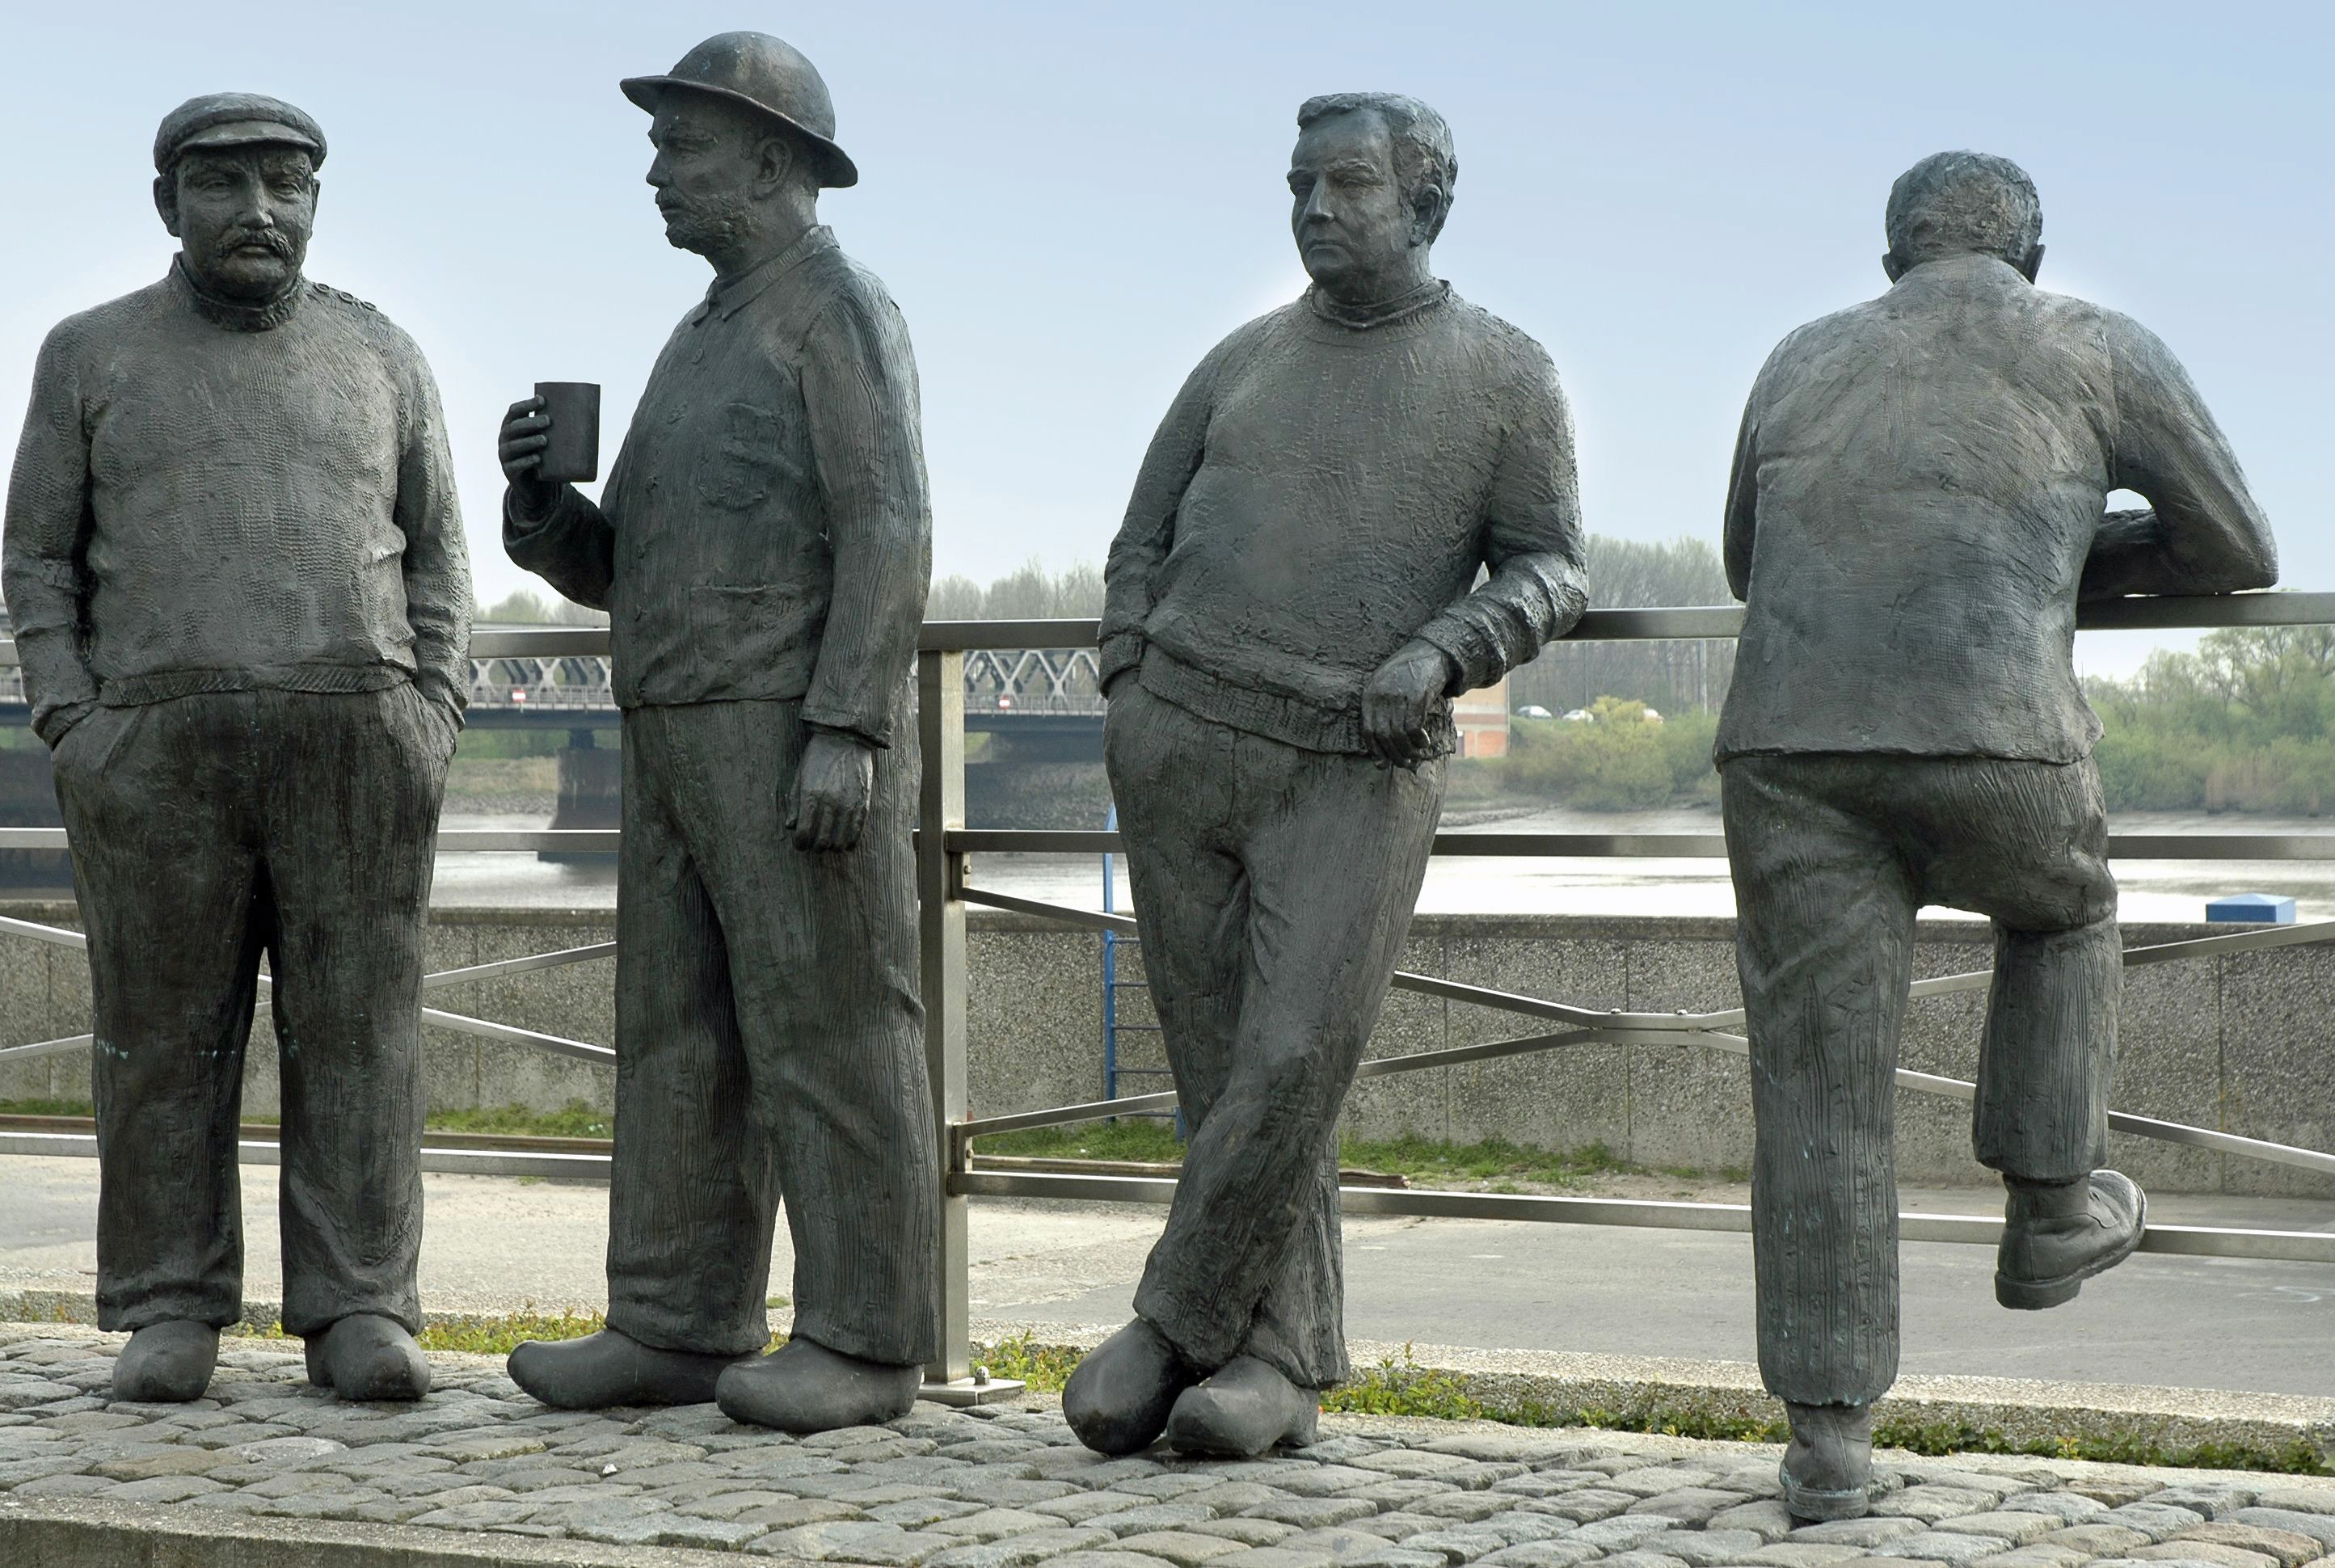 Statues of men just standing around in the Netherlands by 12019